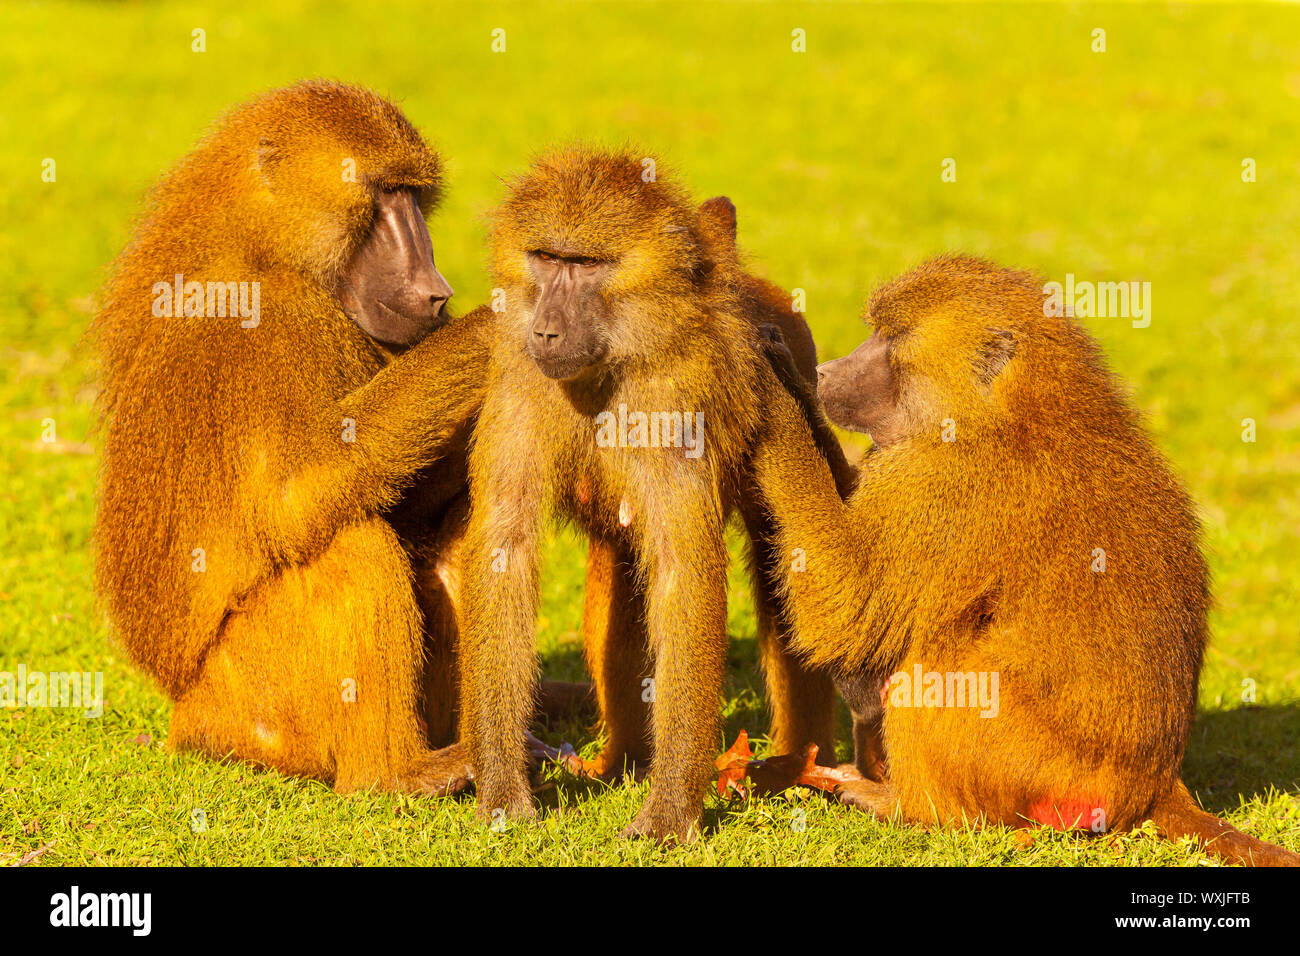 Guinea Baboon (Papio papio) Family Together Grooming each other Stock Photo